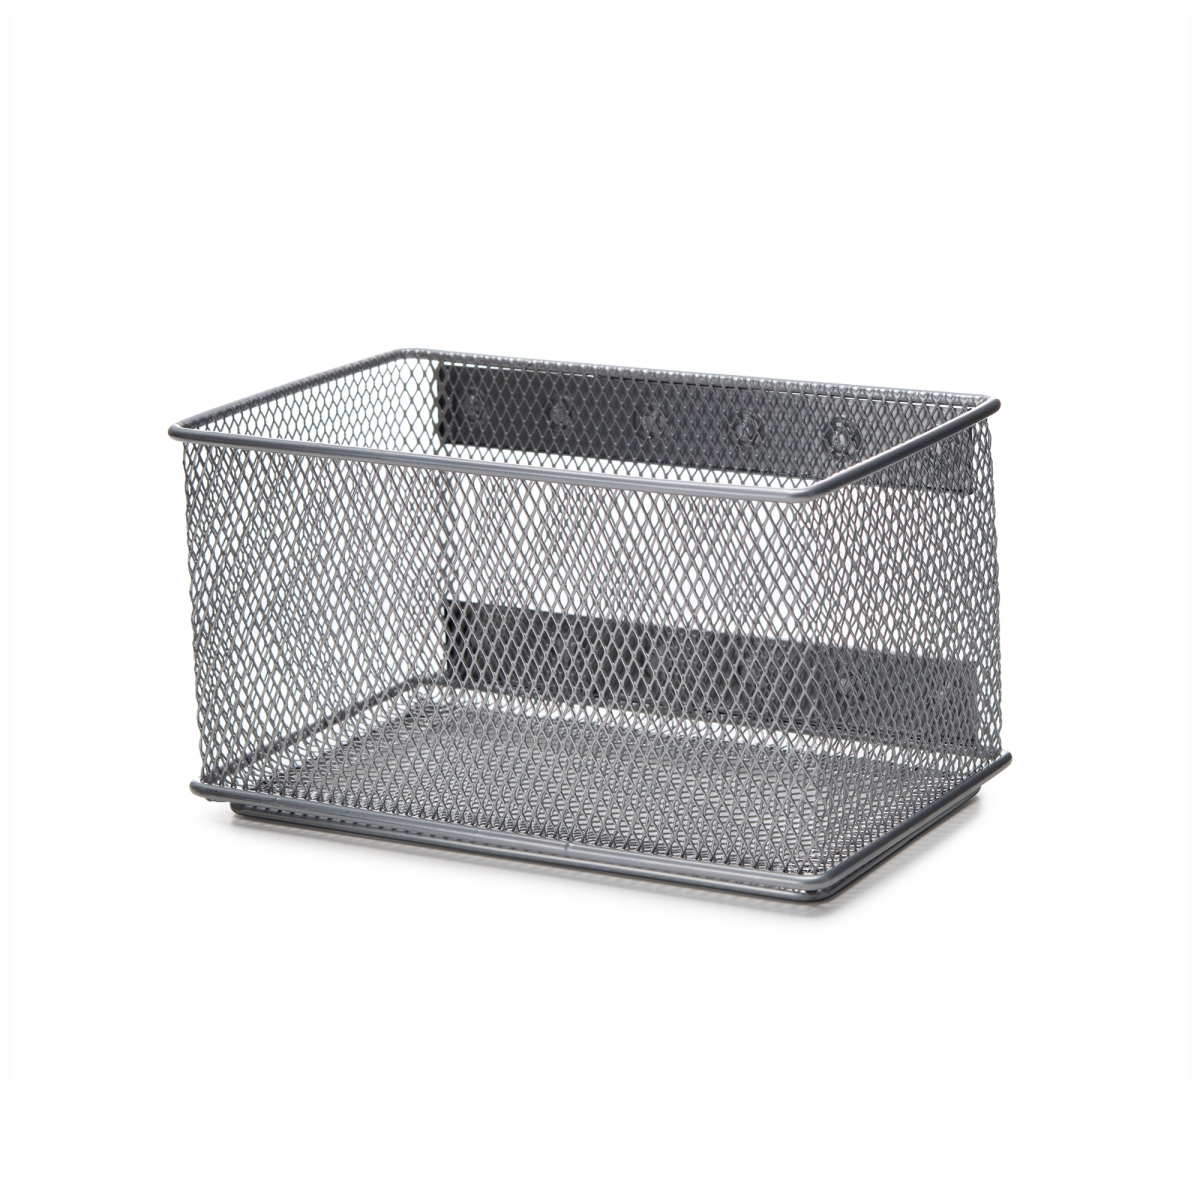 2457vc Wire Mesh Magnetic Storage Basket With Trash Caddy Kitchen Office Supply Organizer, Silver - 4.3 X 4.3 X 7.75 In.